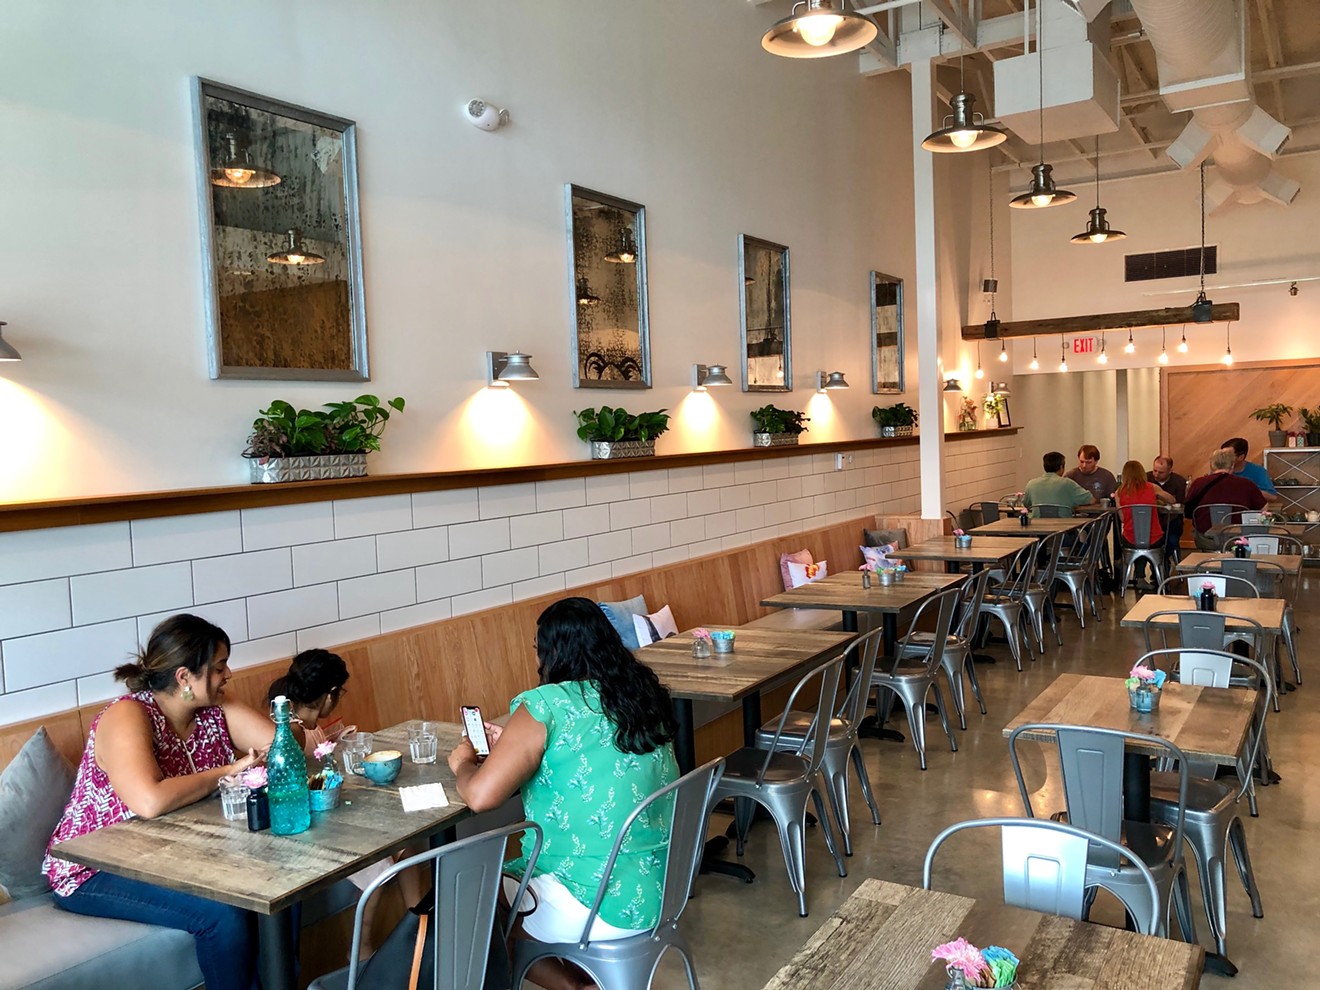 The interior at Aussie Grind, a new Australian cafe in Frisco